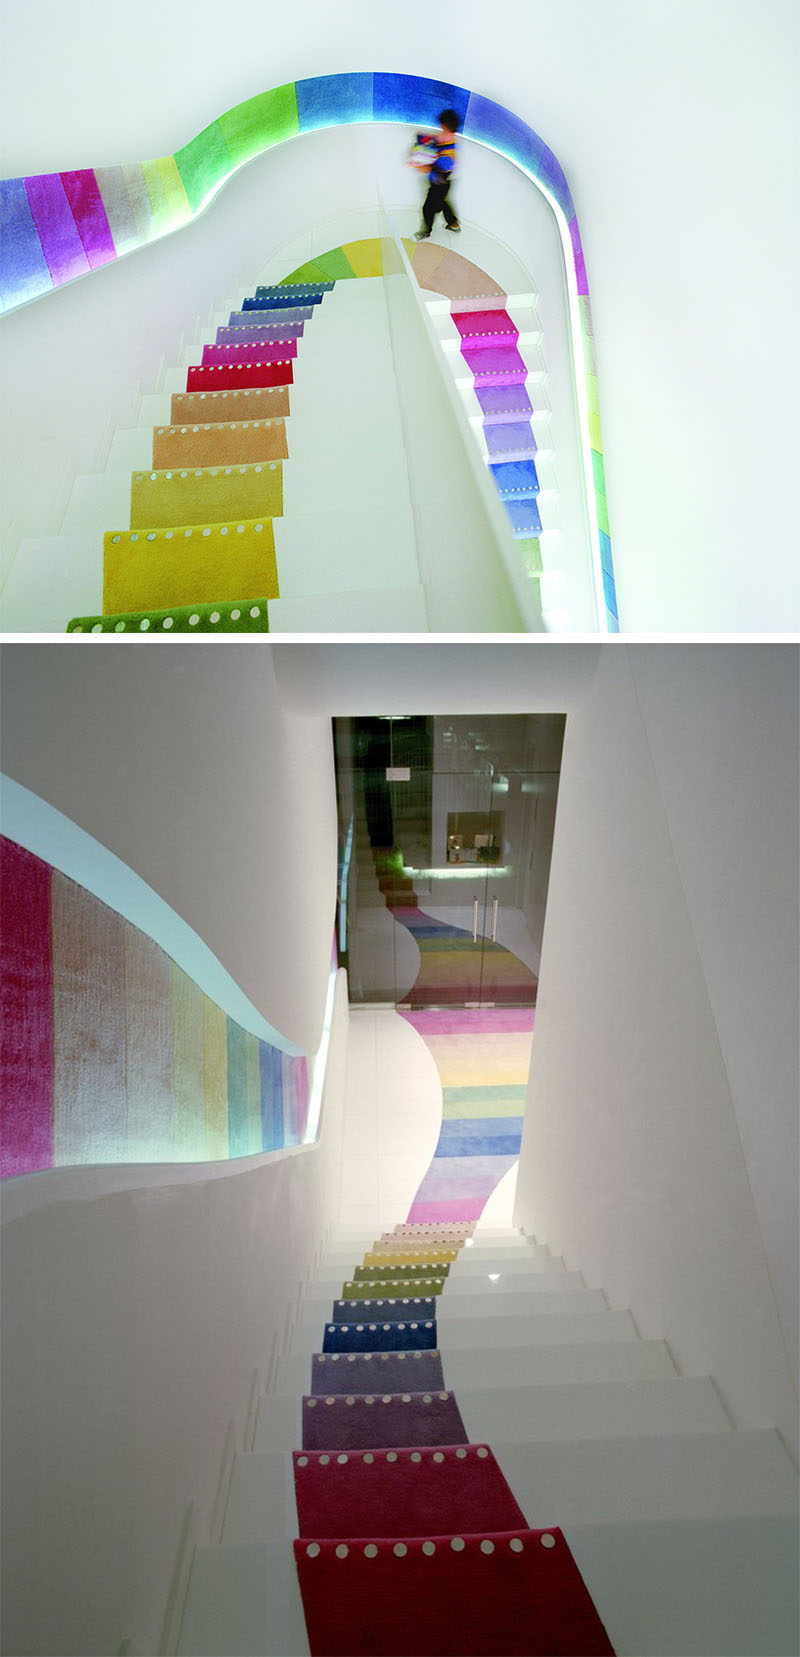 7 Inspiring Examples Of Rainbow Stairs // The stairs in this book store are carpeted in rainbow colors.